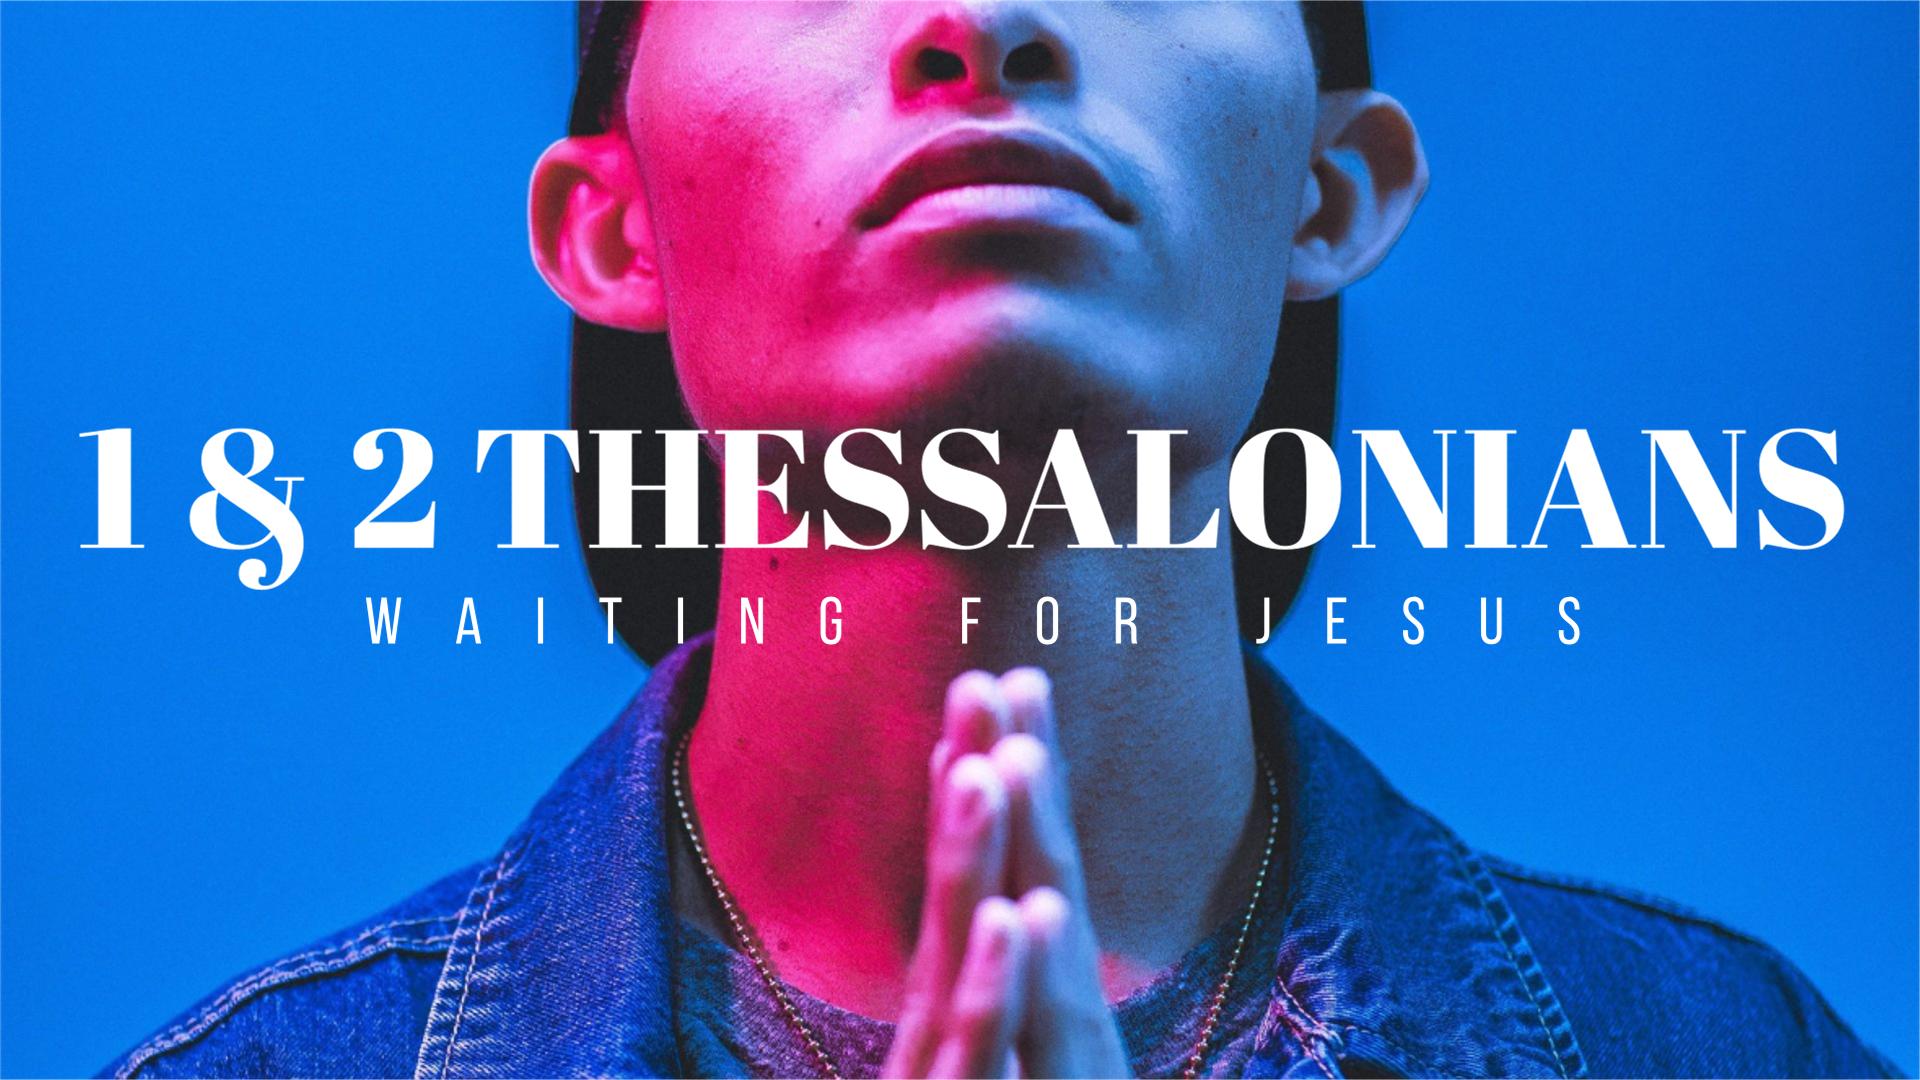 1 & 2 Thessalonians: Waiting For Jesus